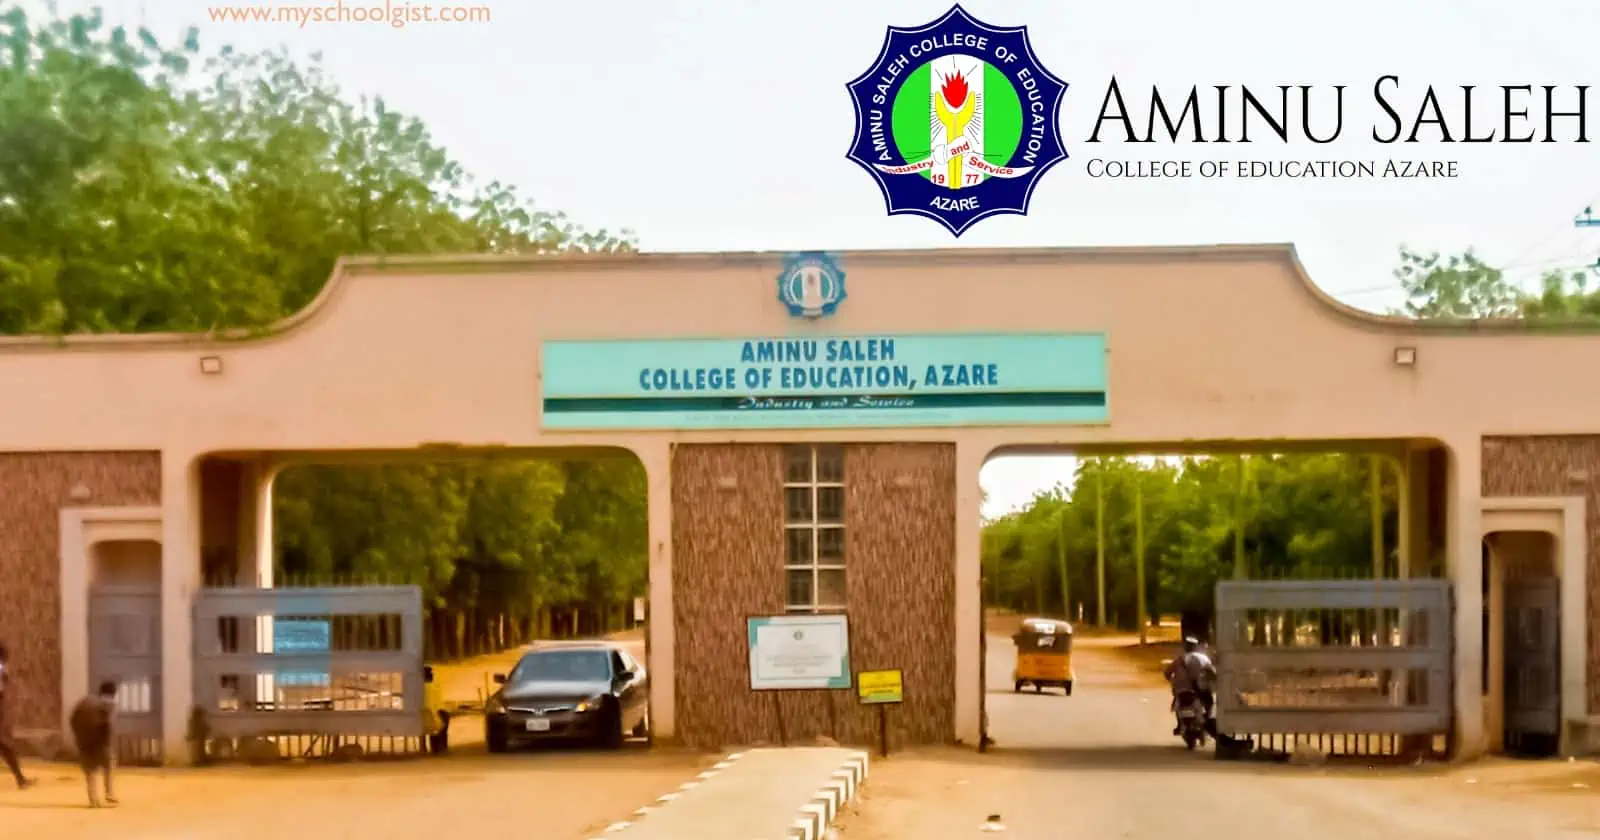 Aminu Saleh College of Education Azare (ASCOEA) Pre-NCE Admission Form